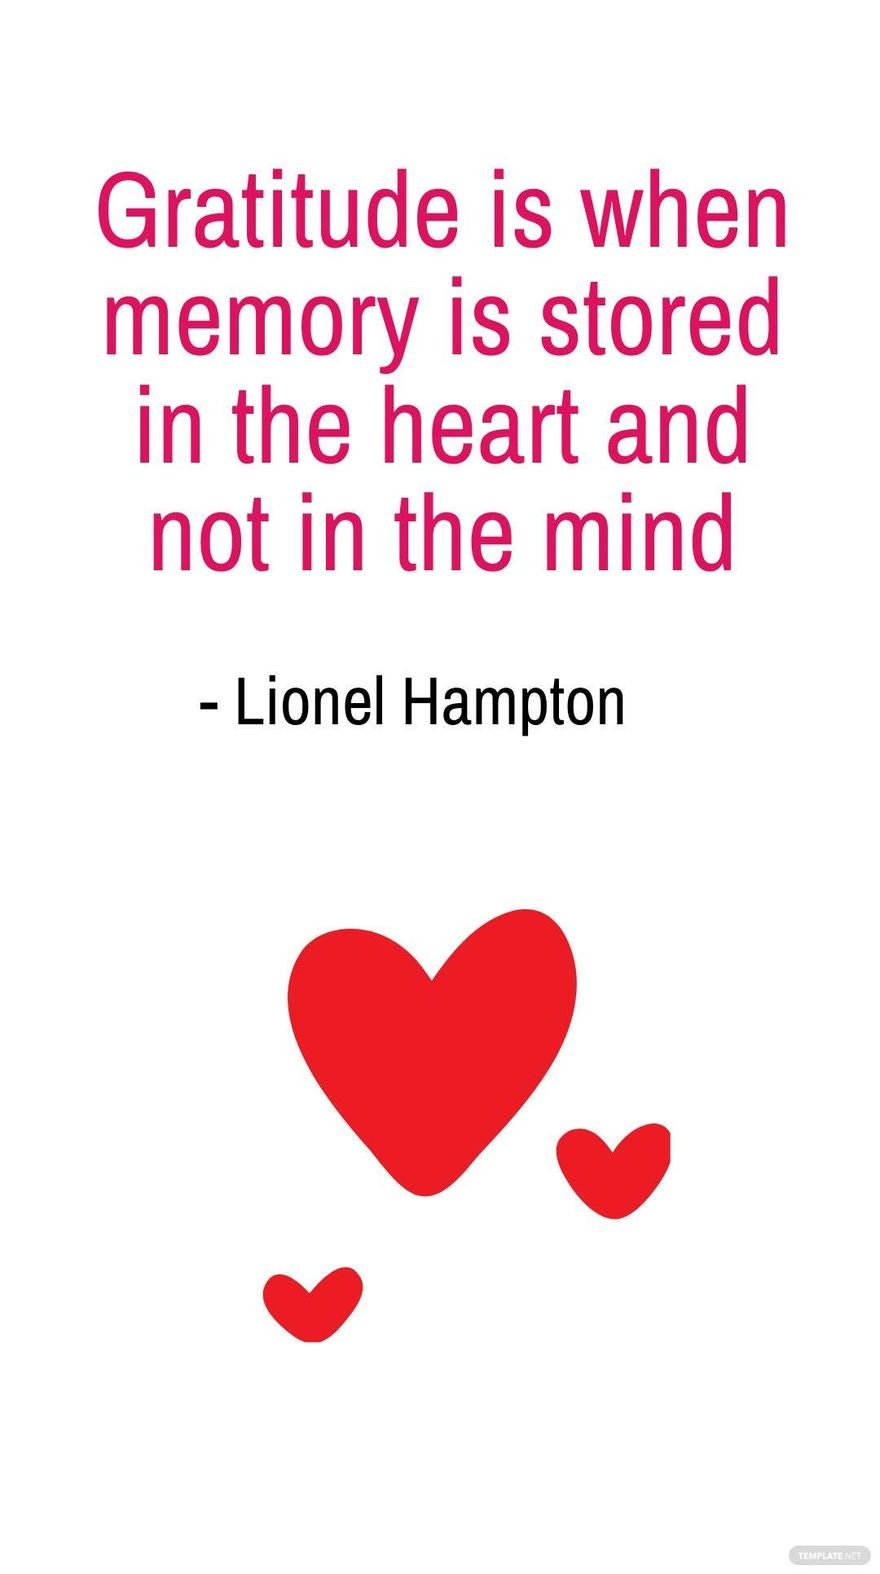 Lionel Hampton - Gratitude is when memory is stored in the heart and not in the mind